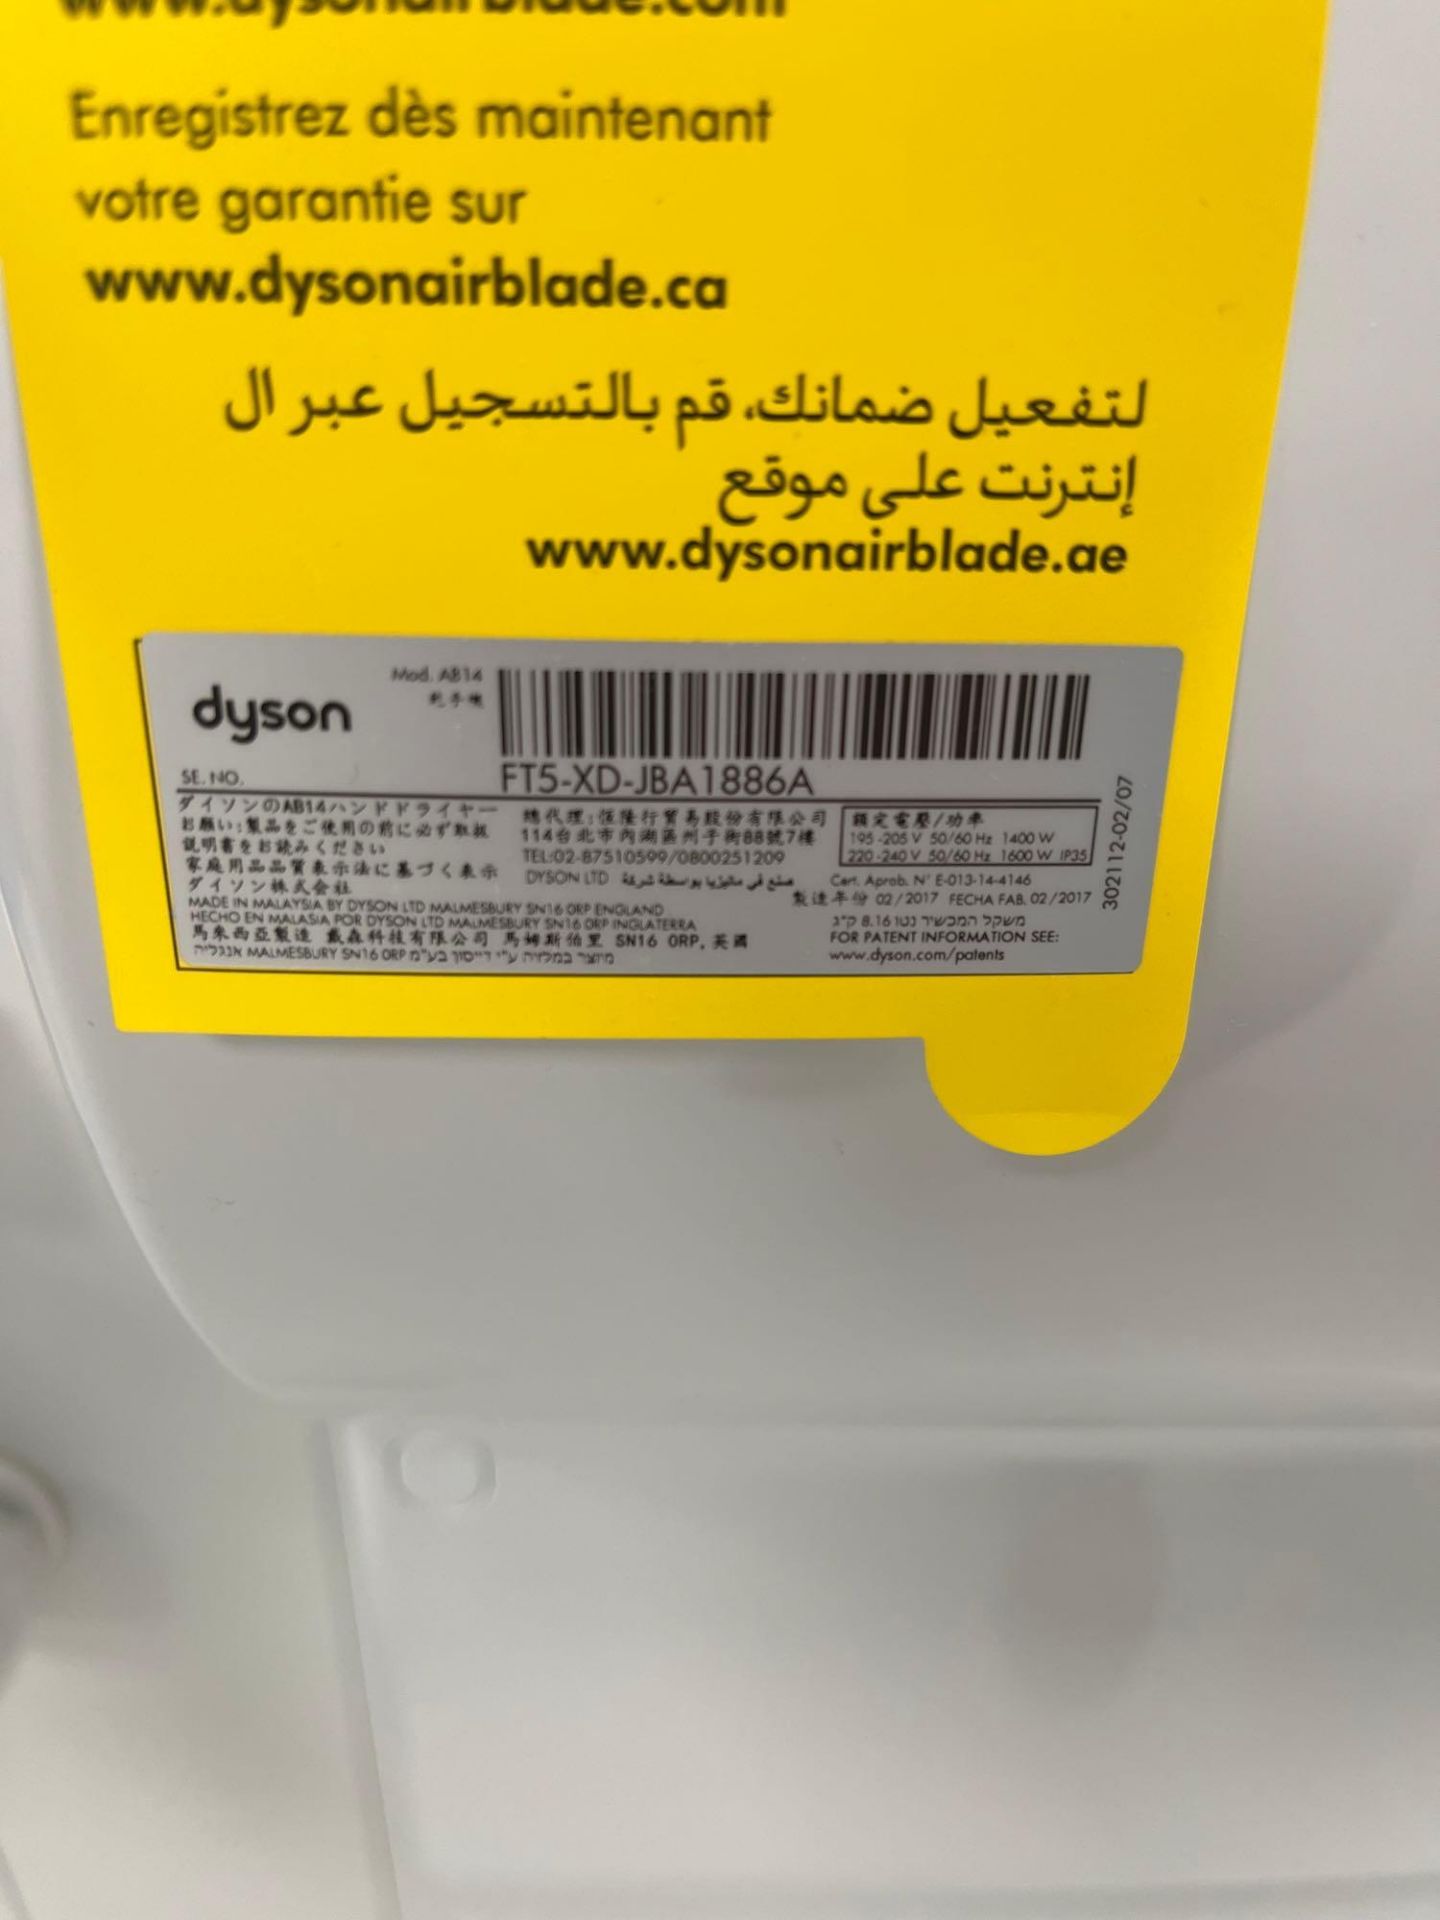 Dyson, Dyson Airblade DB, Hand dryer - Image 2 of 2